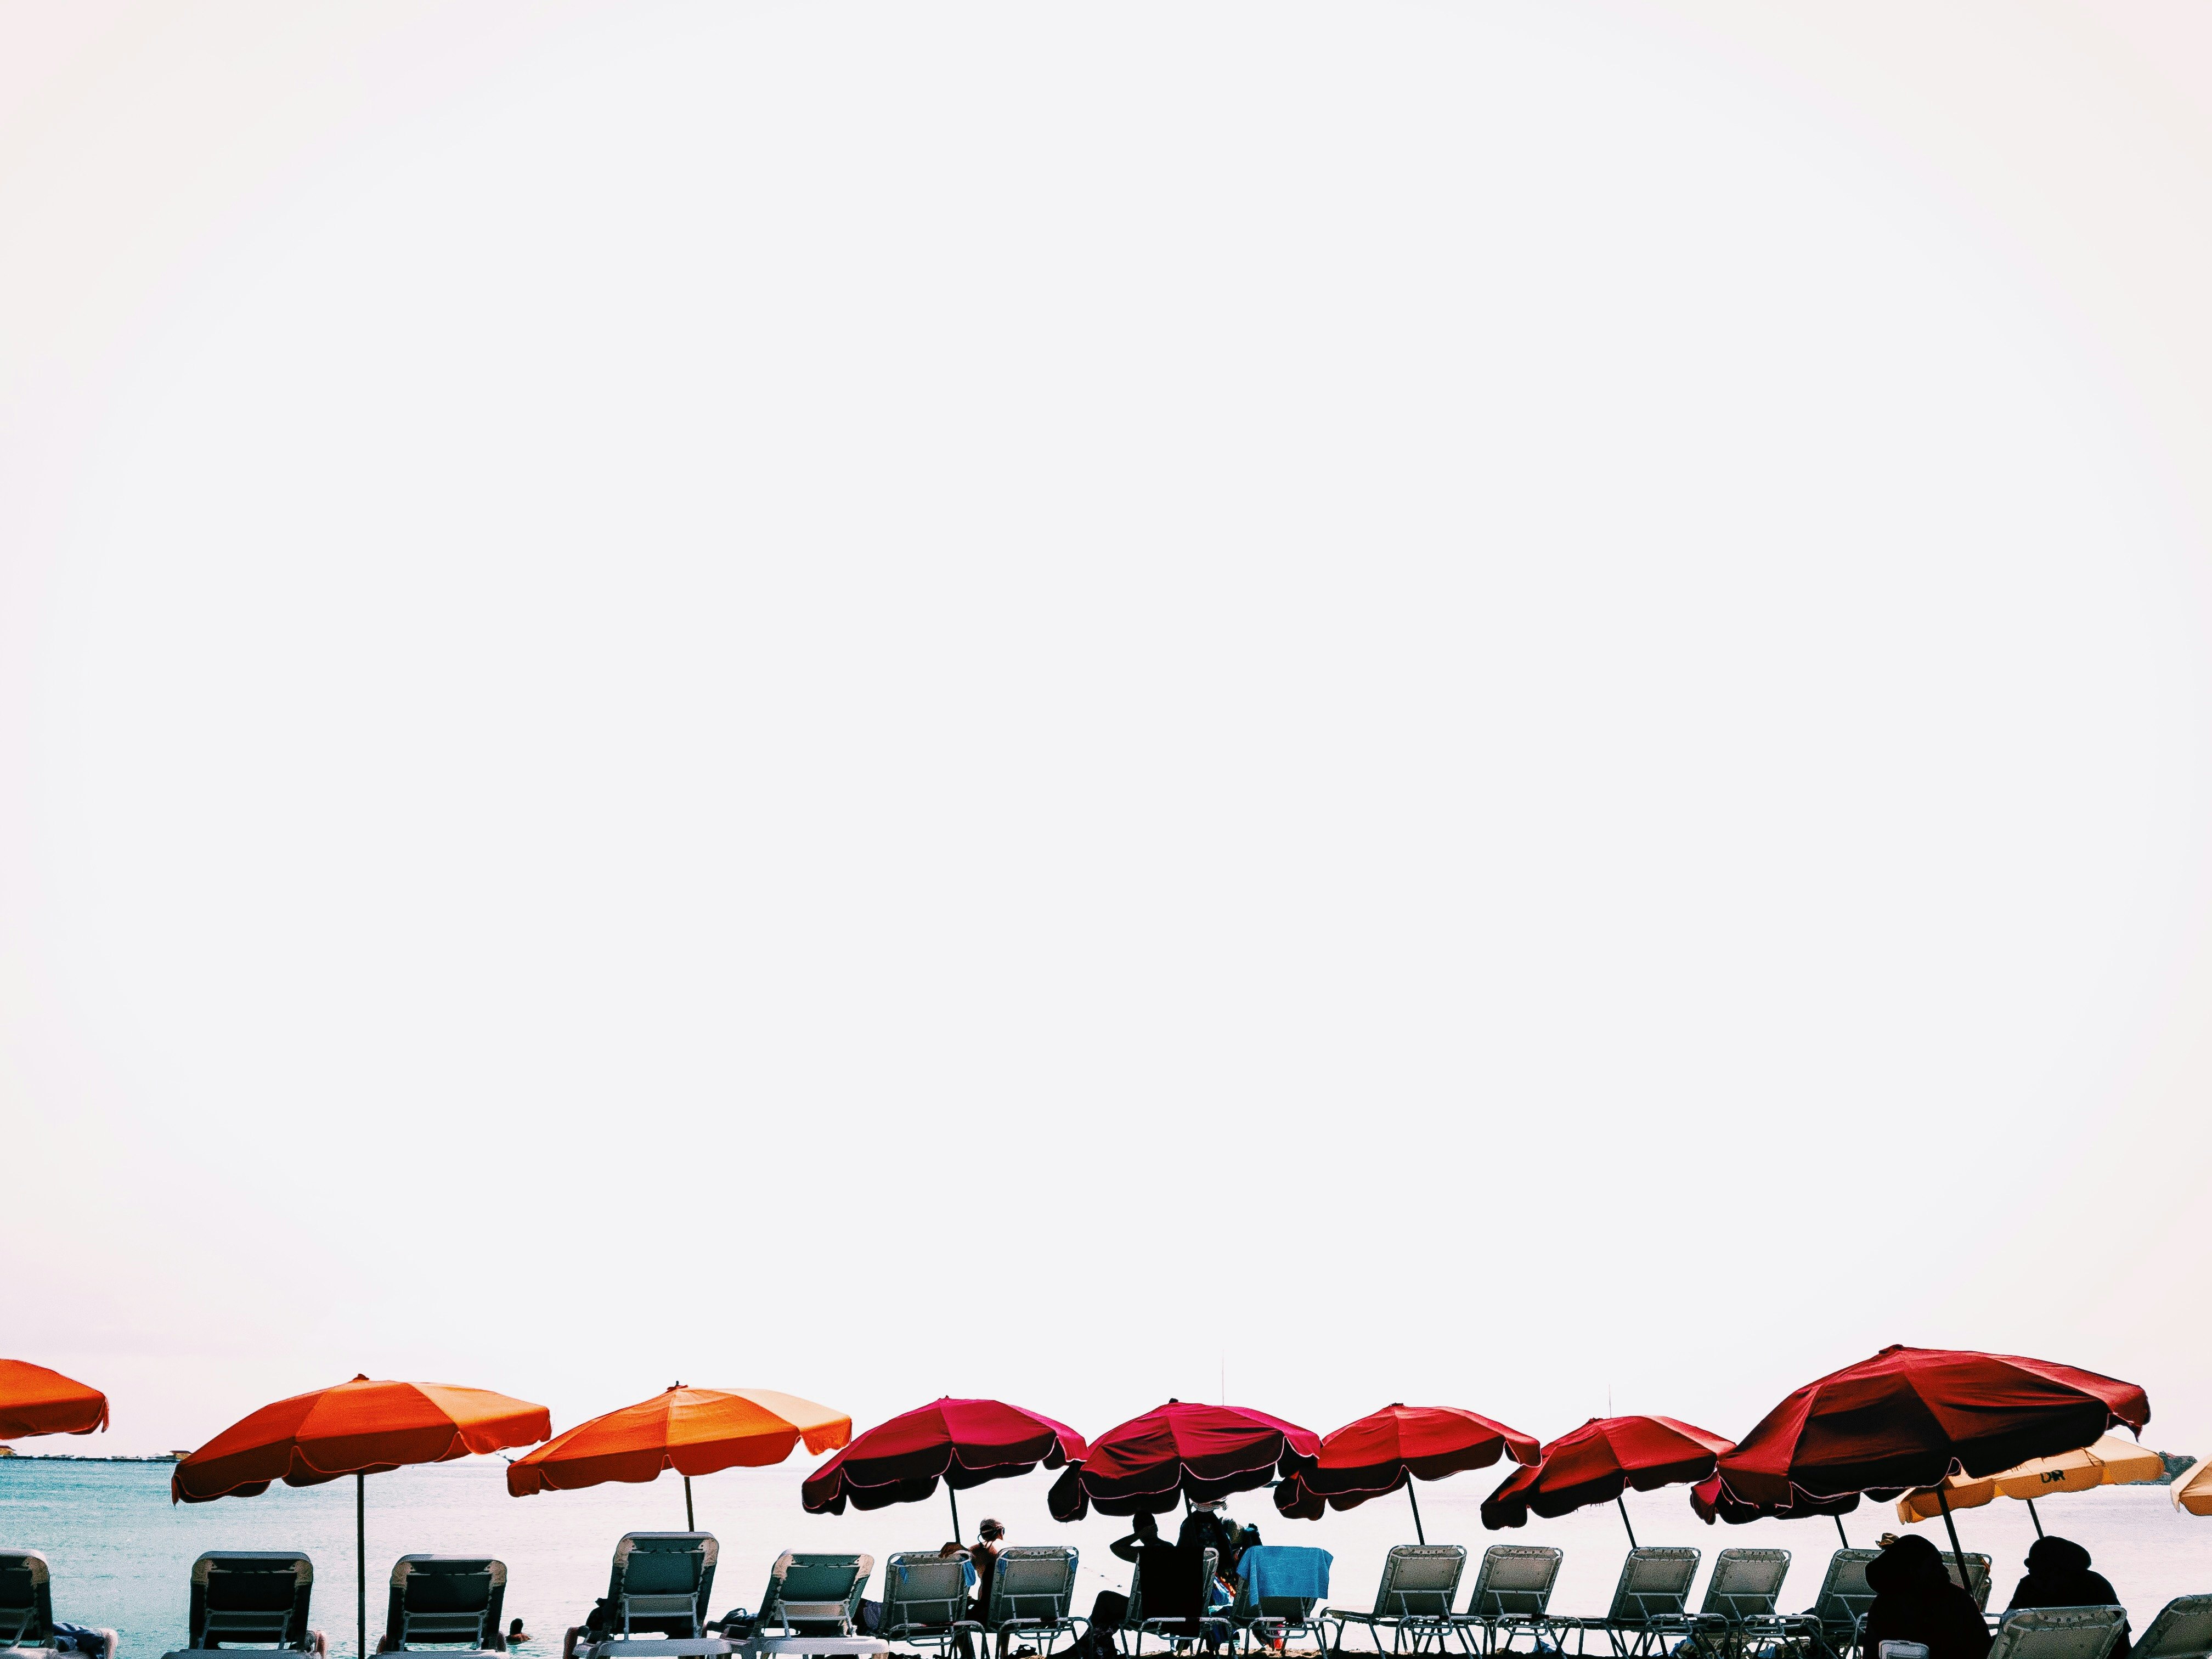 red and orange patio umbrellas in front body of water